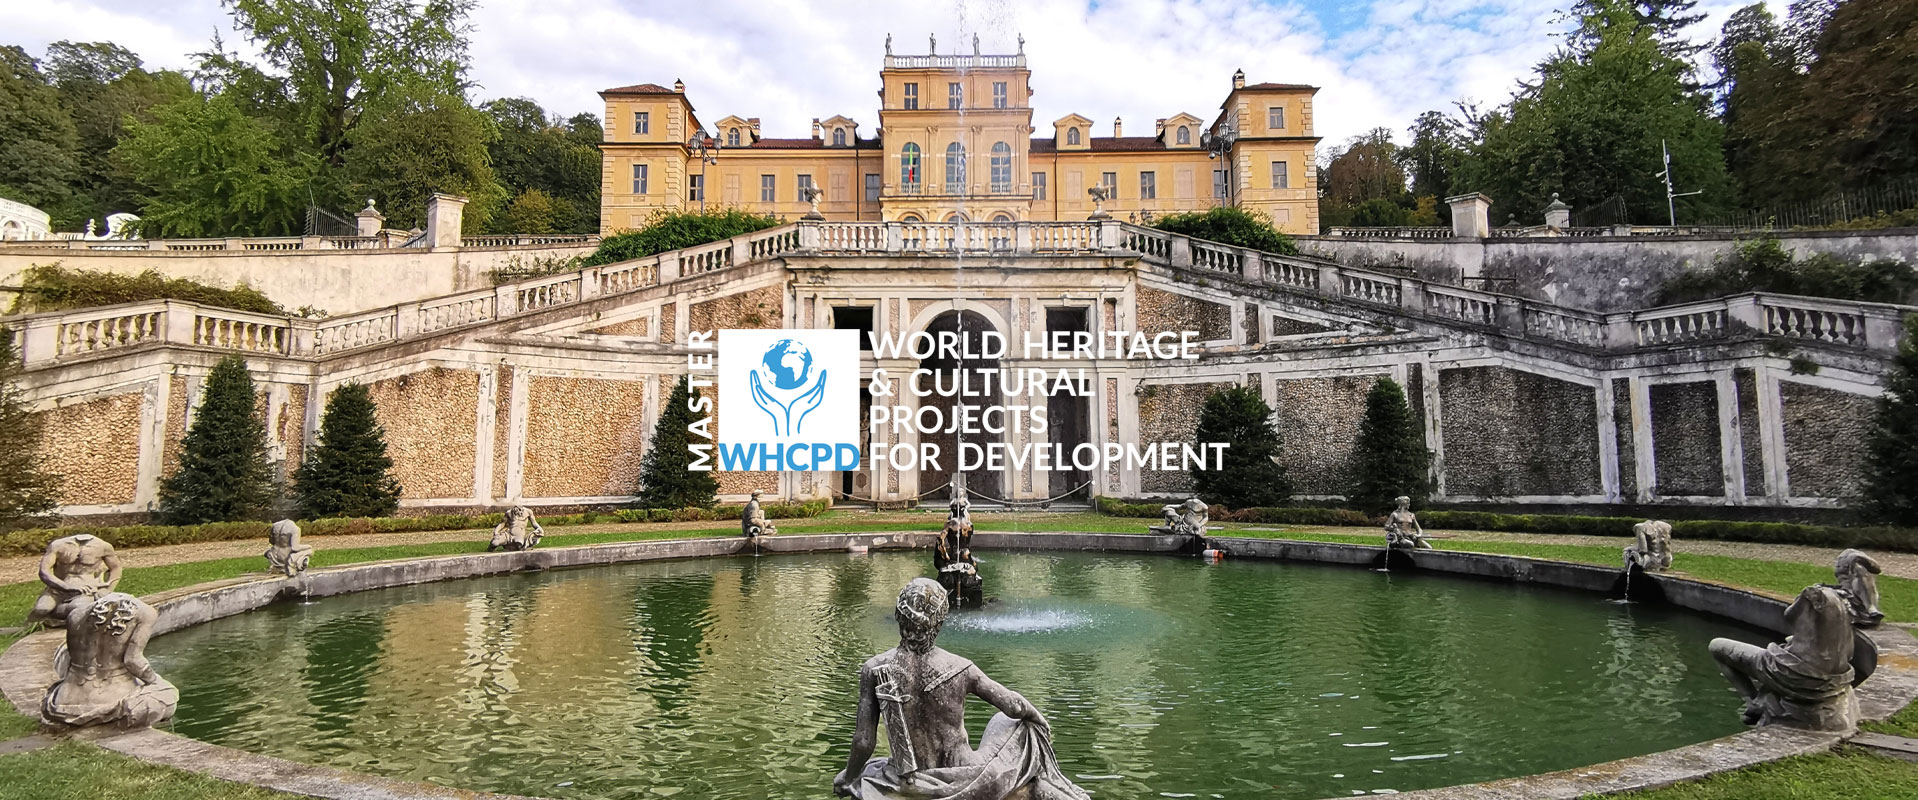 World Heritage and Cultural Projects for Development